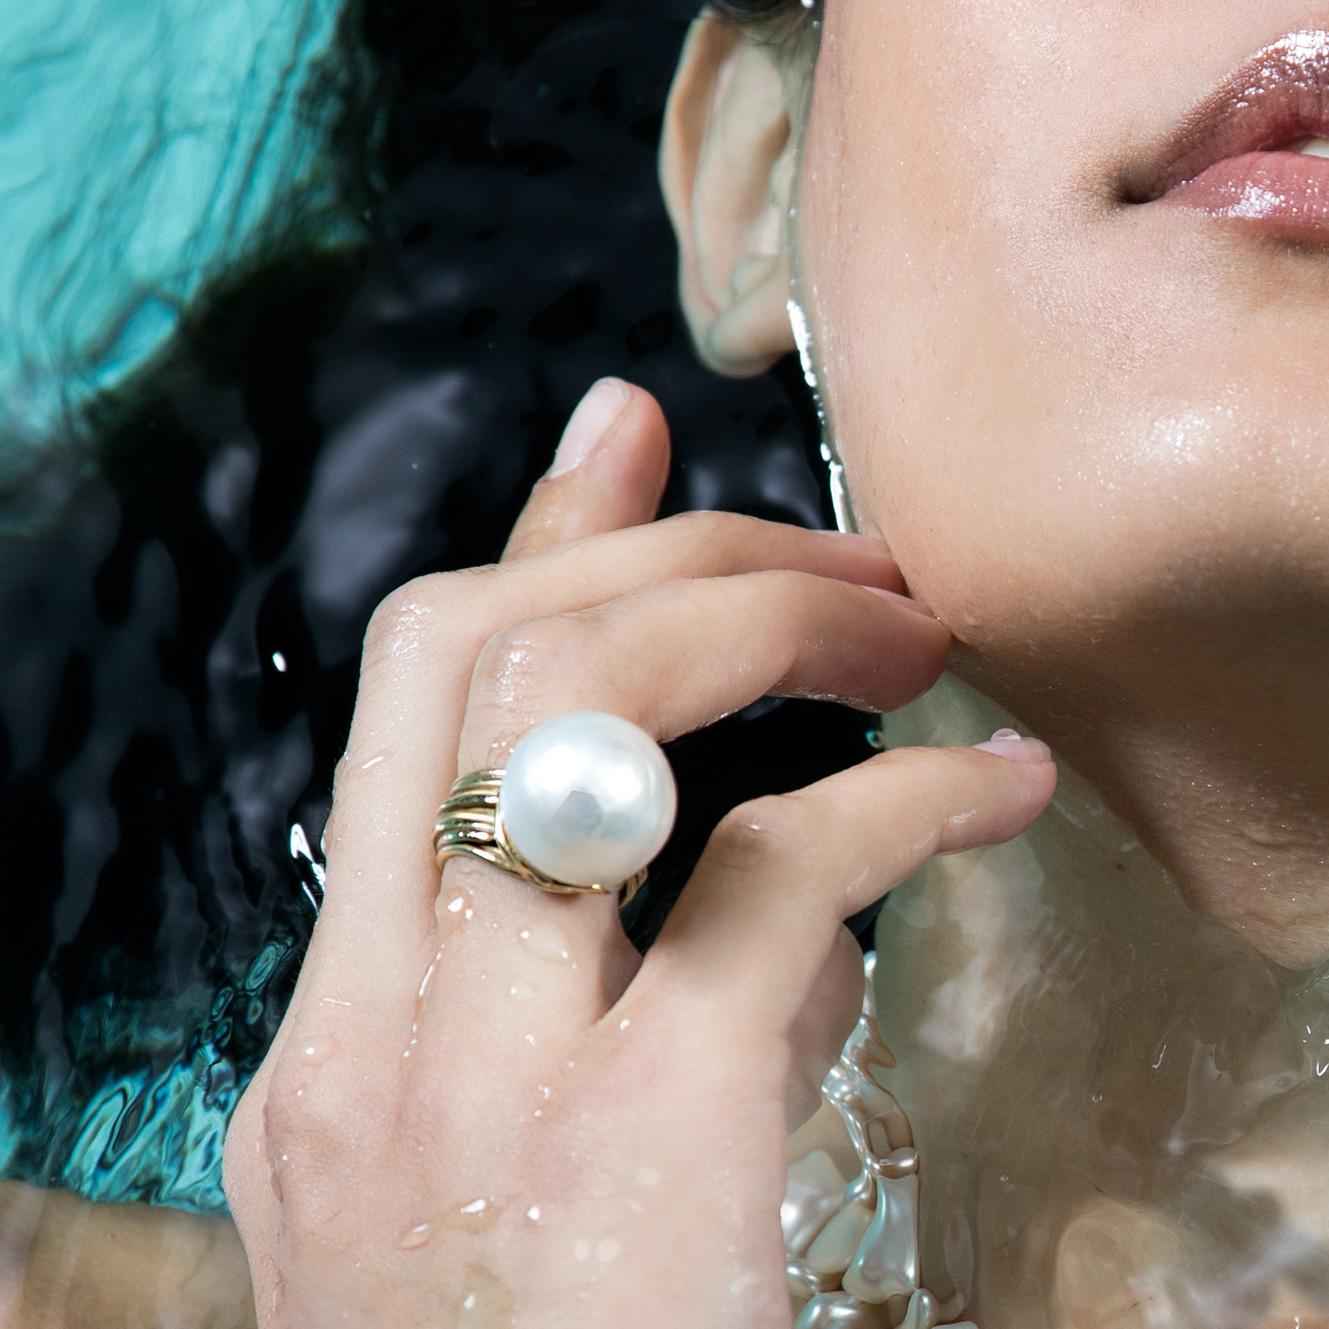 A luminous south sea Australian pearl ring with a one-of-a-kind delicate yellow gold woven design.

This design is inspired by the mermaid legends where there is a unique creature as beautiful as this pearl that is always protected with gold woven.